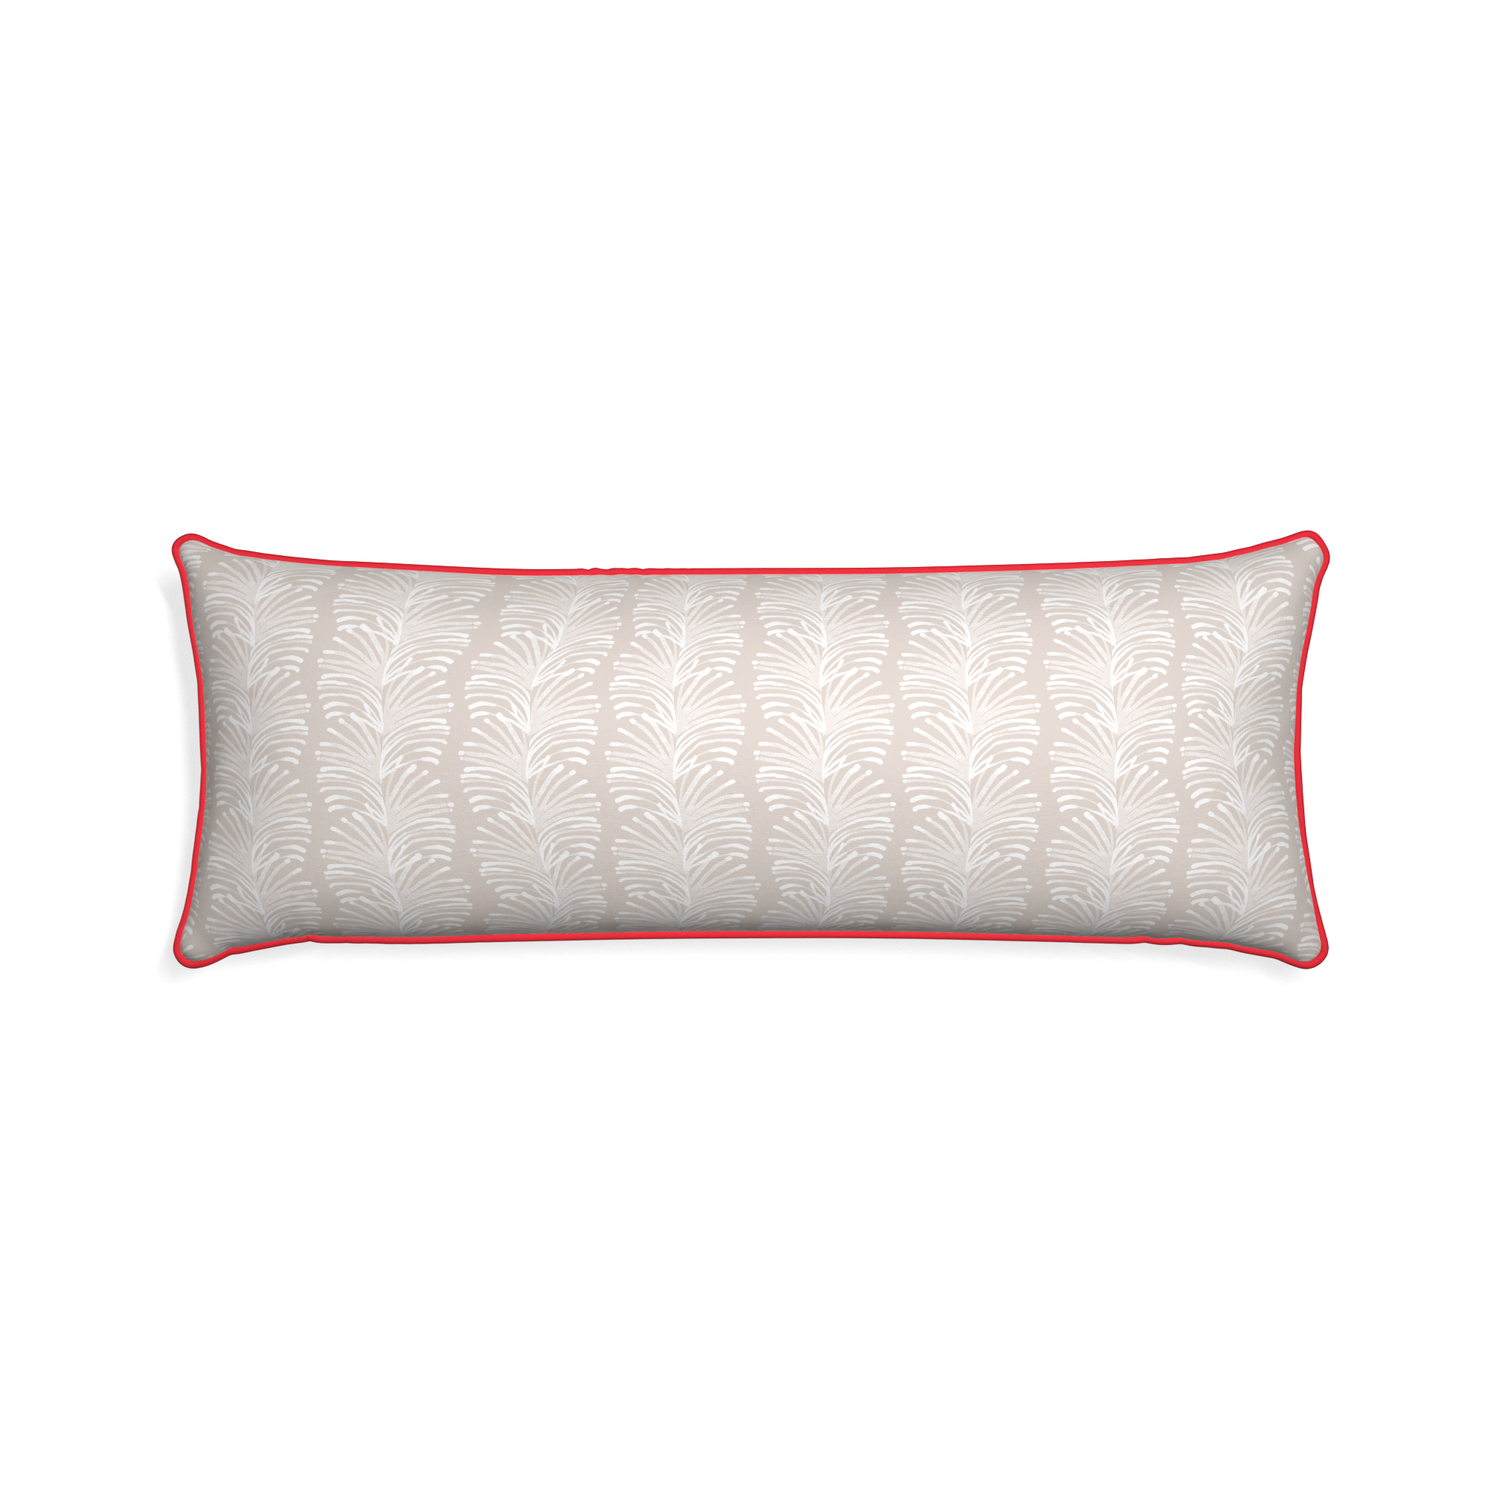 Xl-lumbar emma sand custom pillow with cherry piping on white background